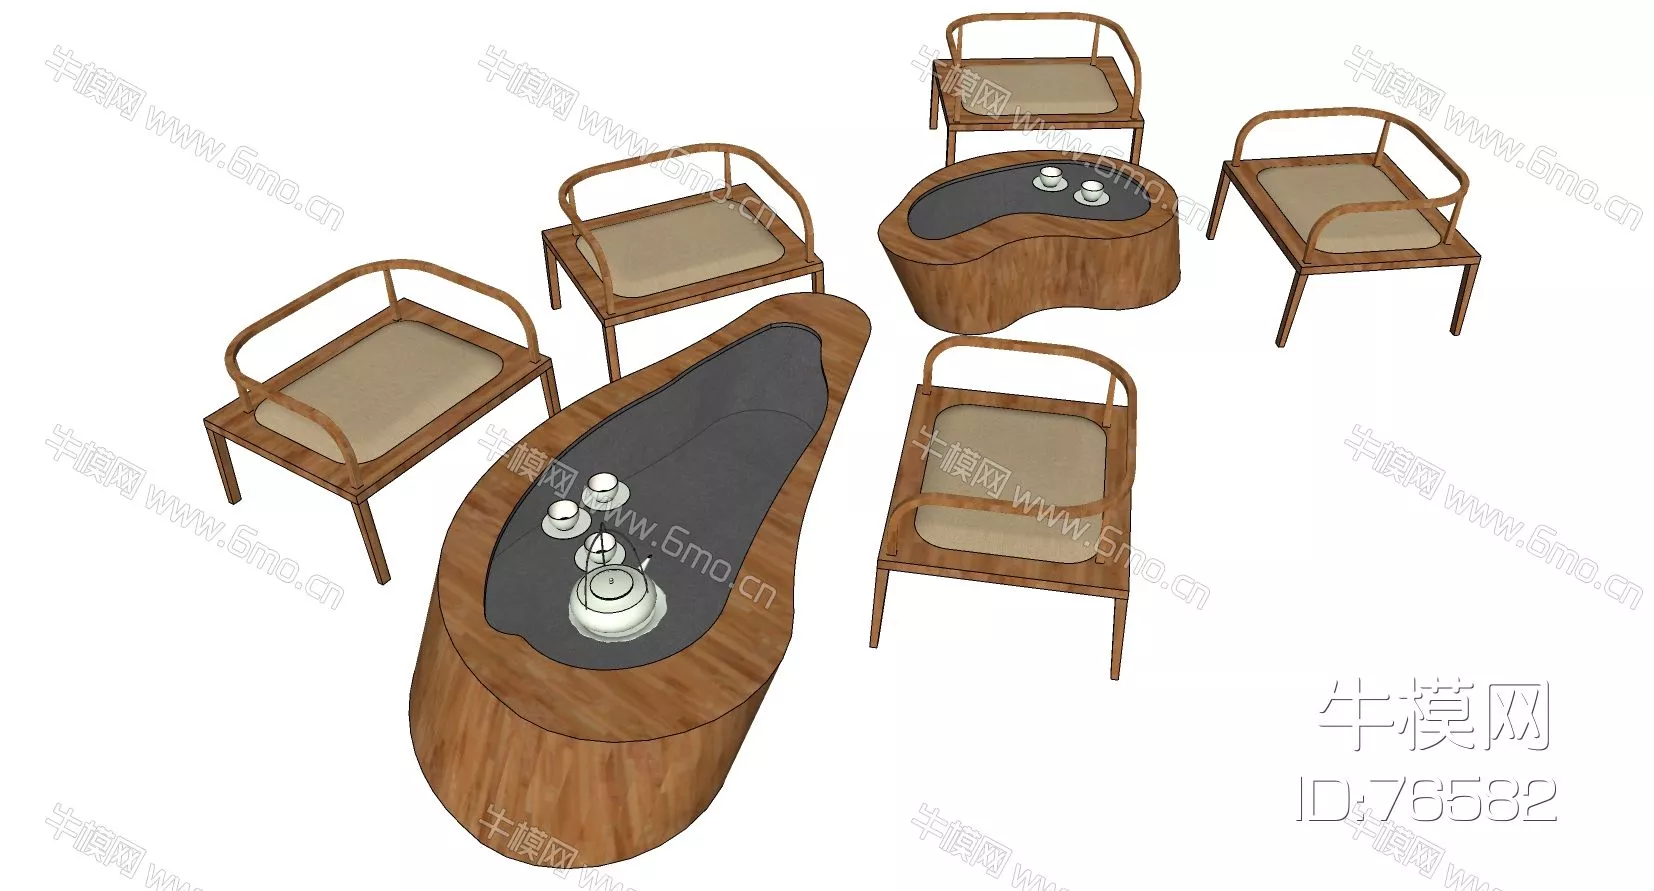 CHINESE COFFEE TABLE - SKETCHUP 3D MODEL - ENSCAPE - 76582